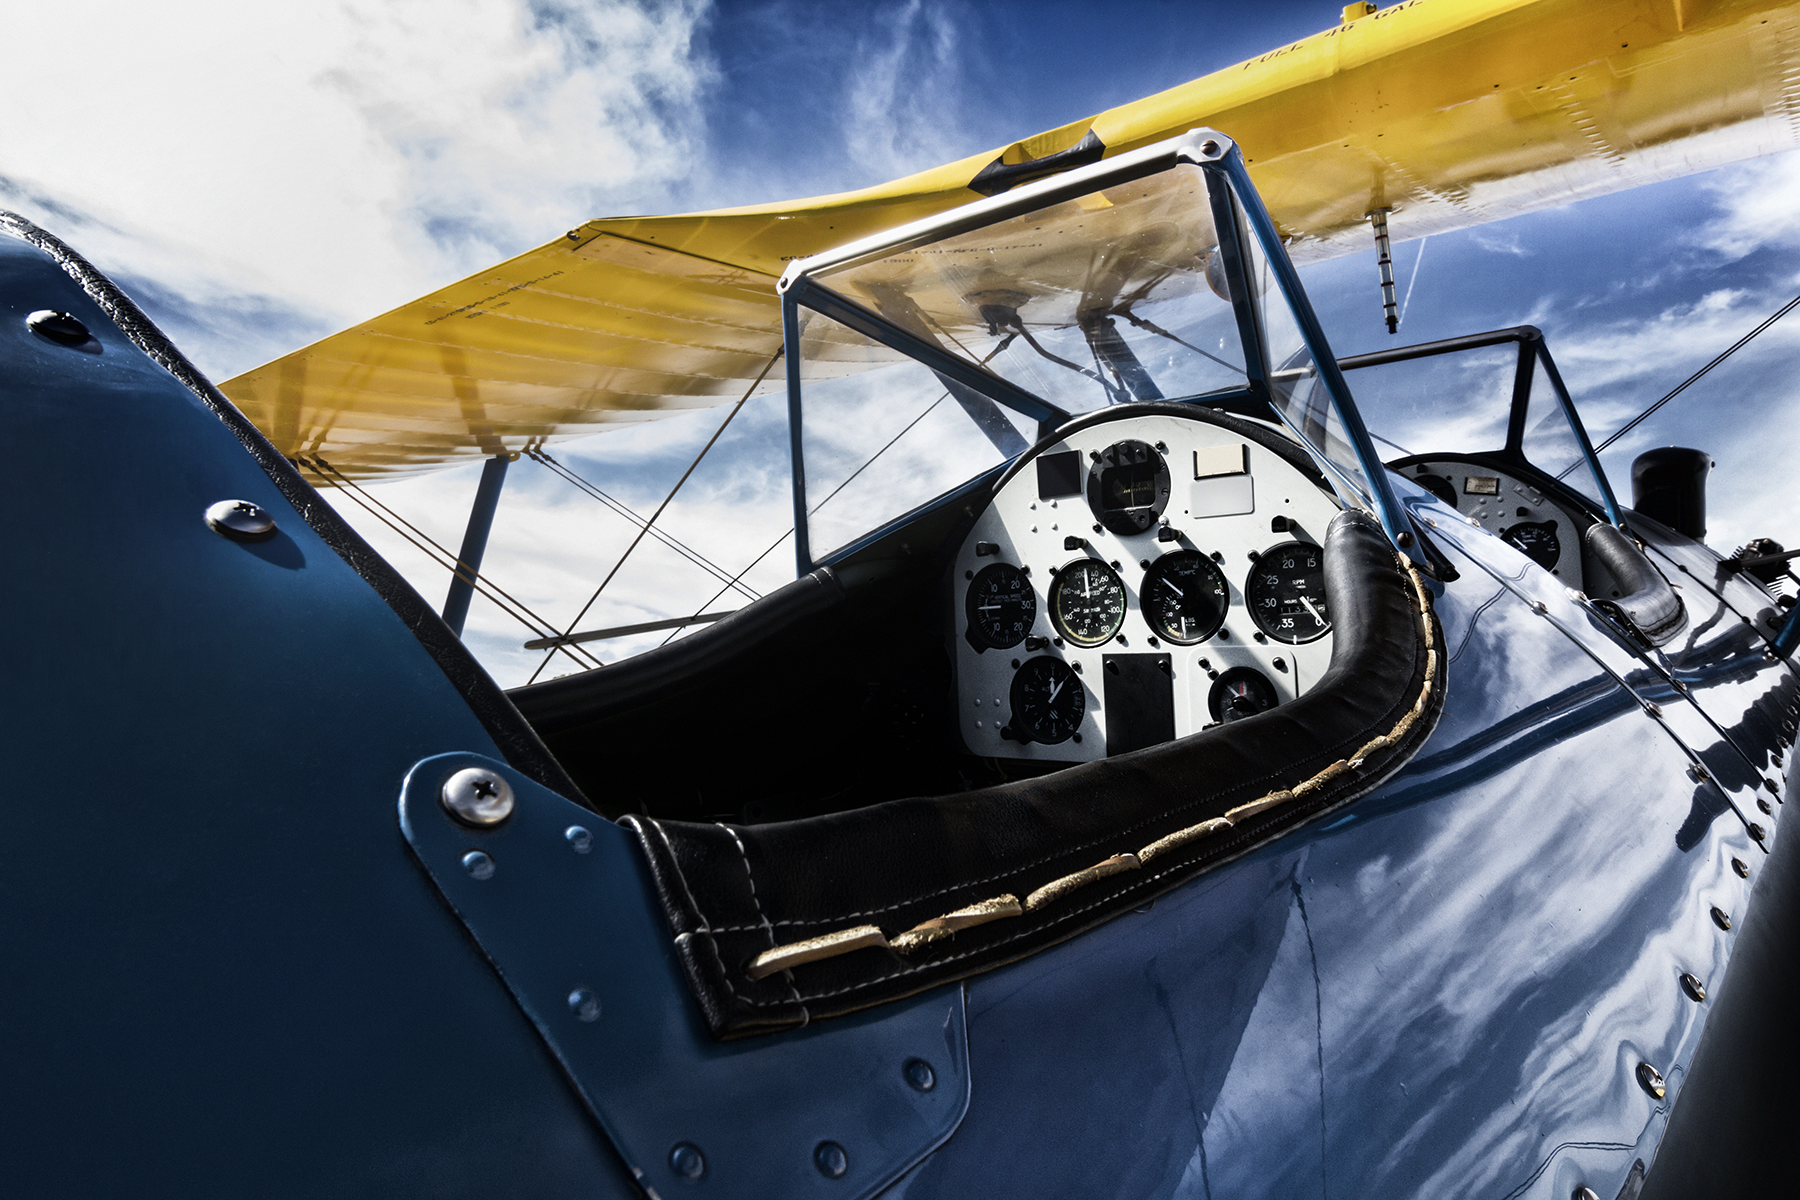 This nostalgic photo treatment of a bi-wing aircraft cockpit adds to the historical appeal aviation had in the early 1900's.